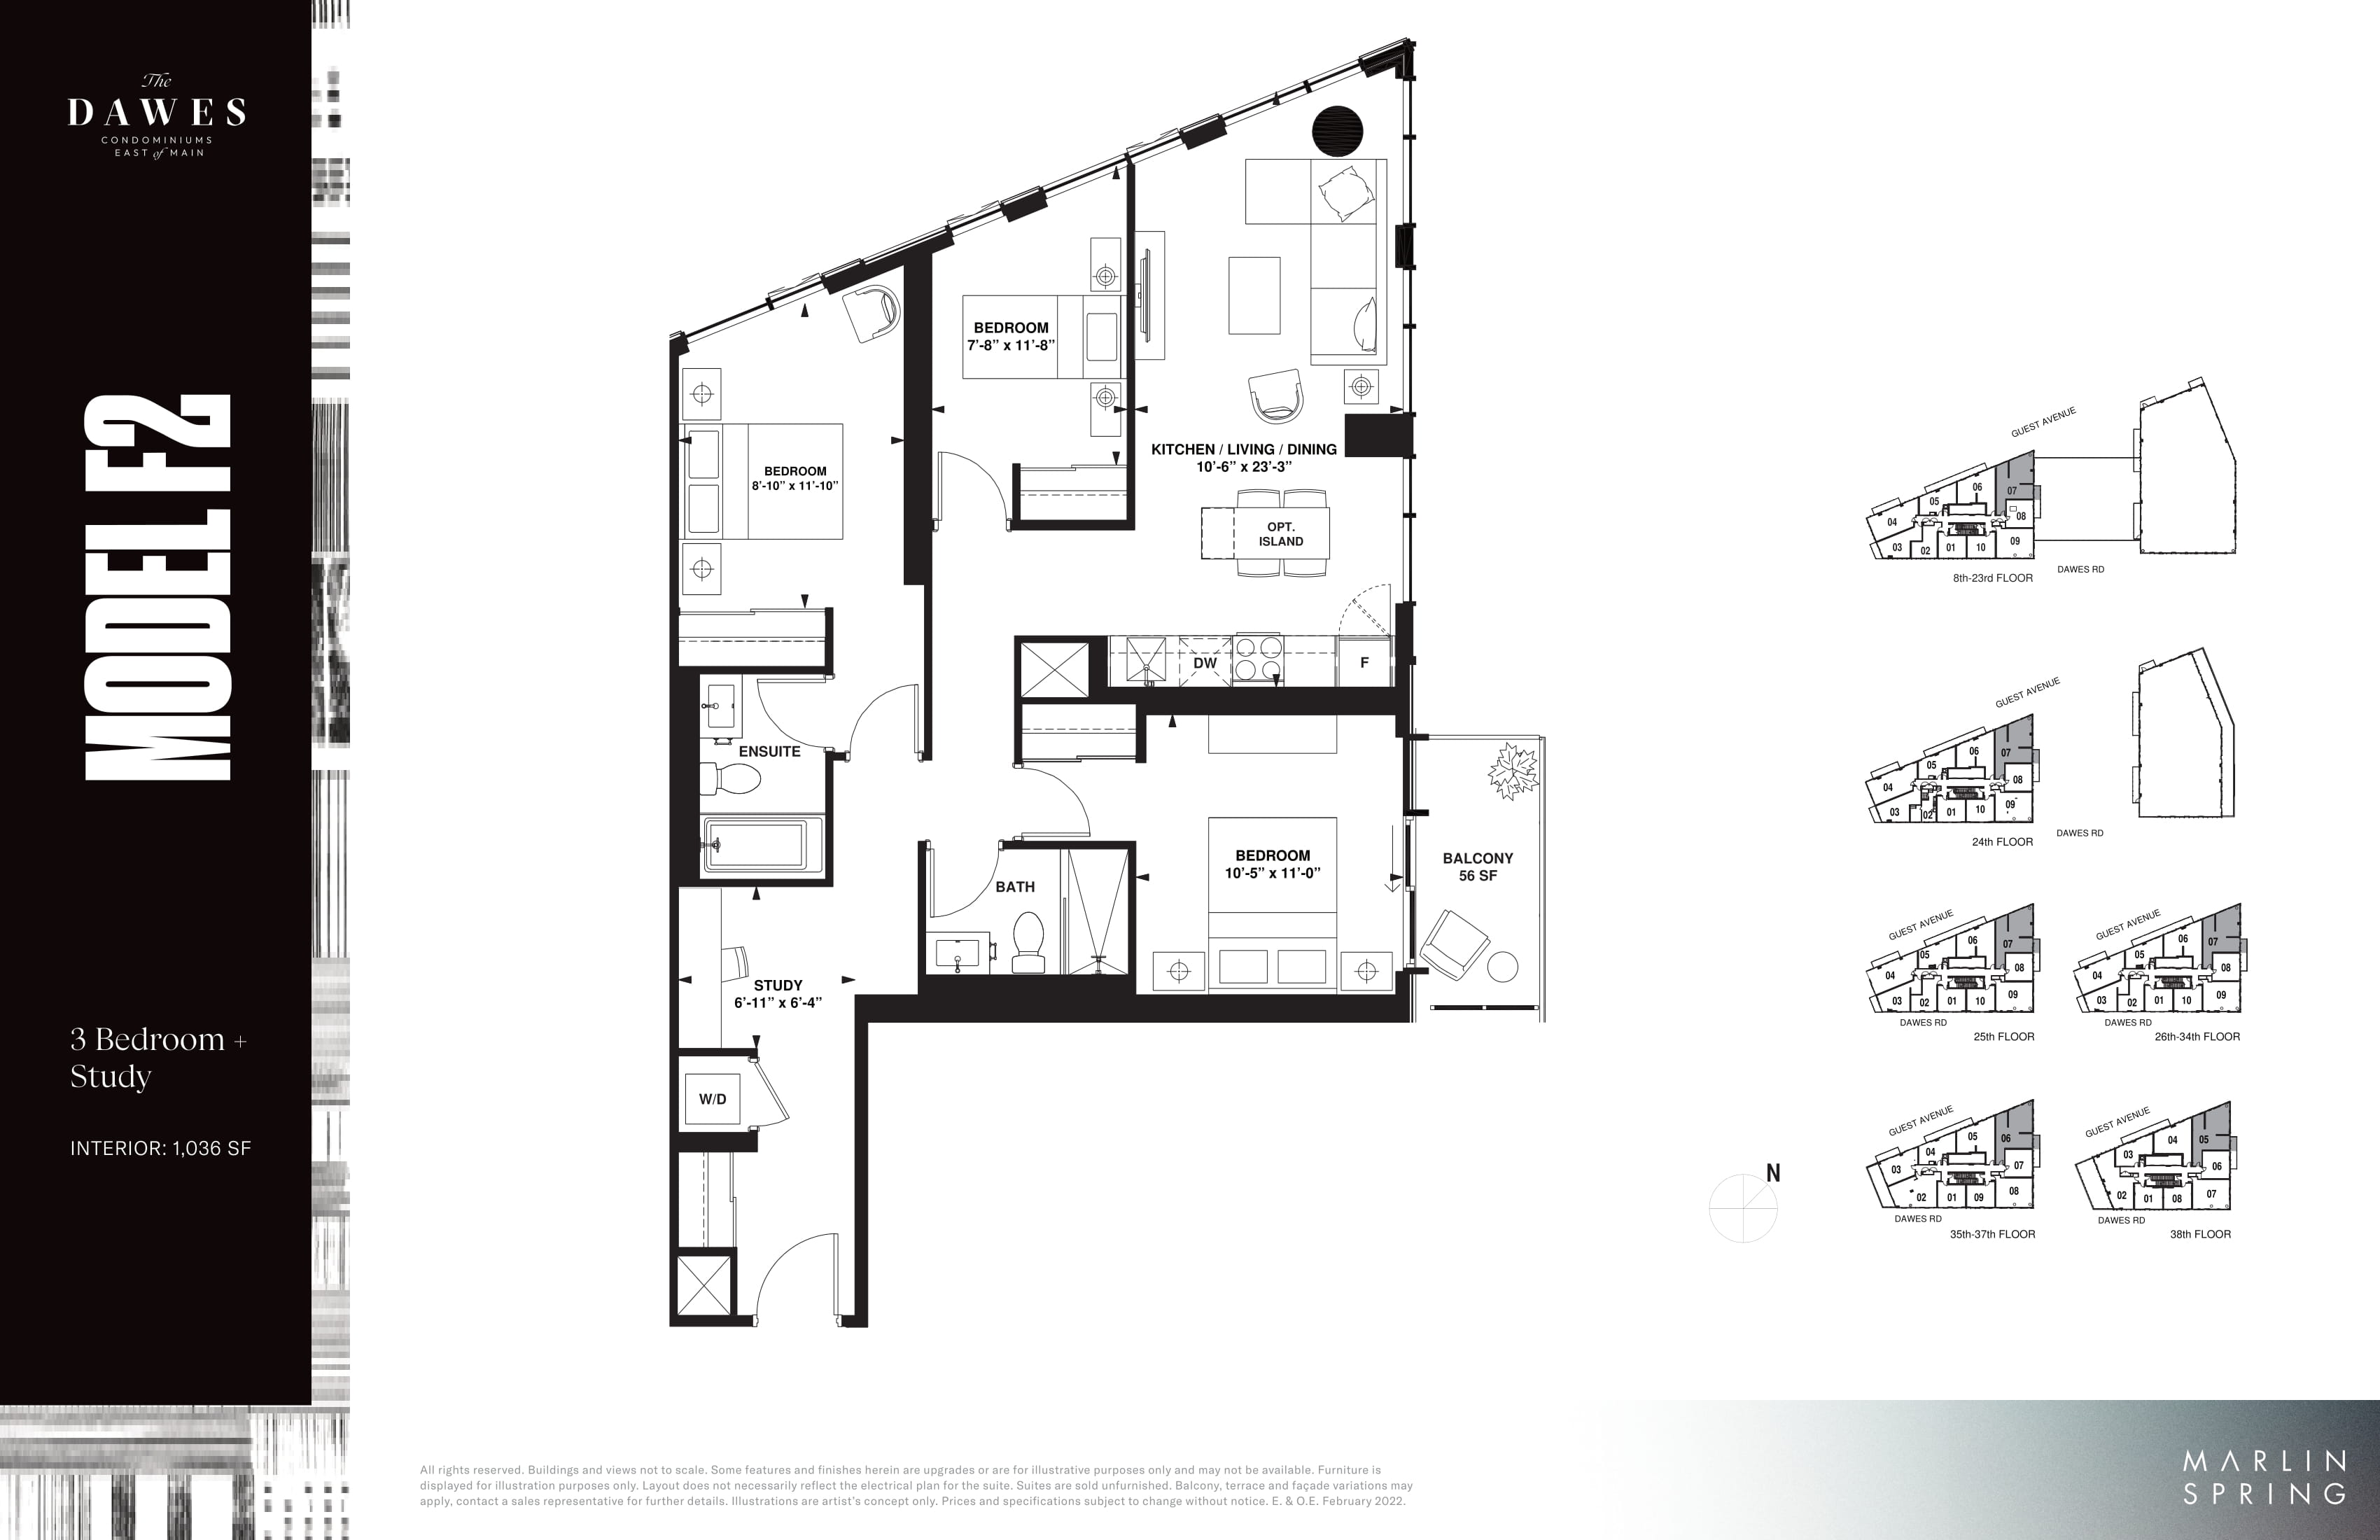  Floor Plan of The Dawes with undefined beds